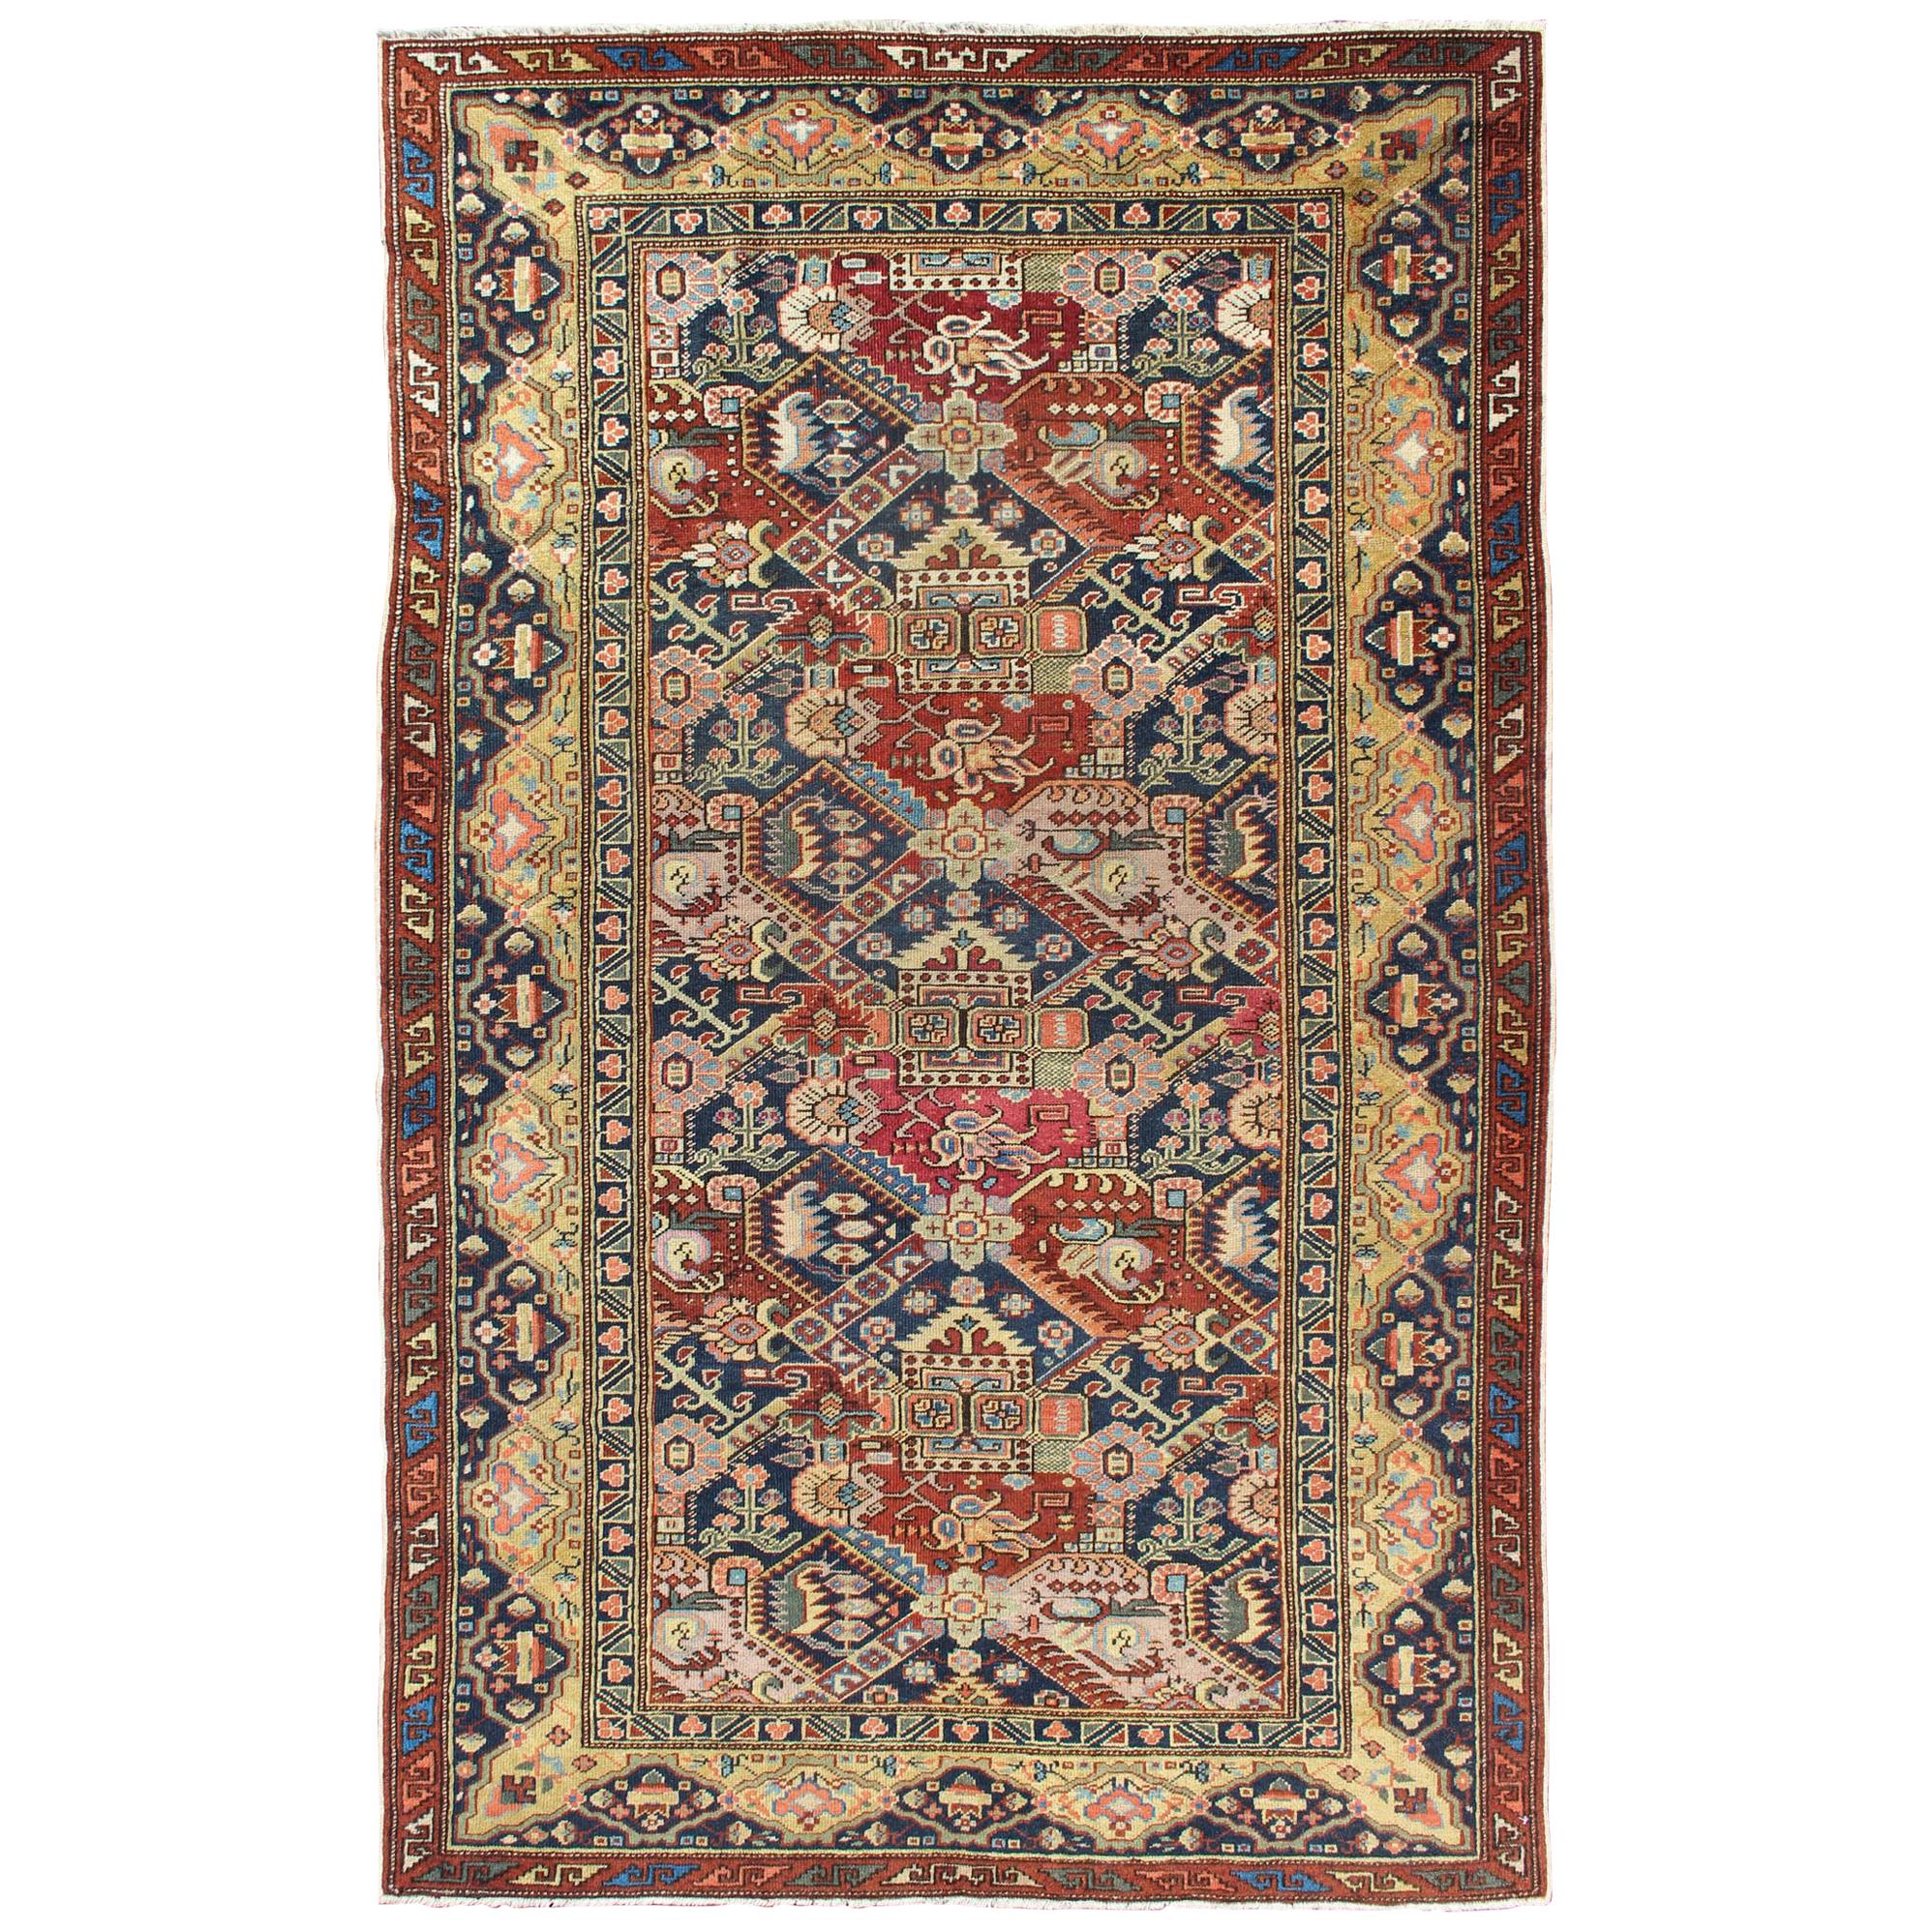 19th Century Exquisite Antique Caucasian Seychour Rug In Red's And Blue's